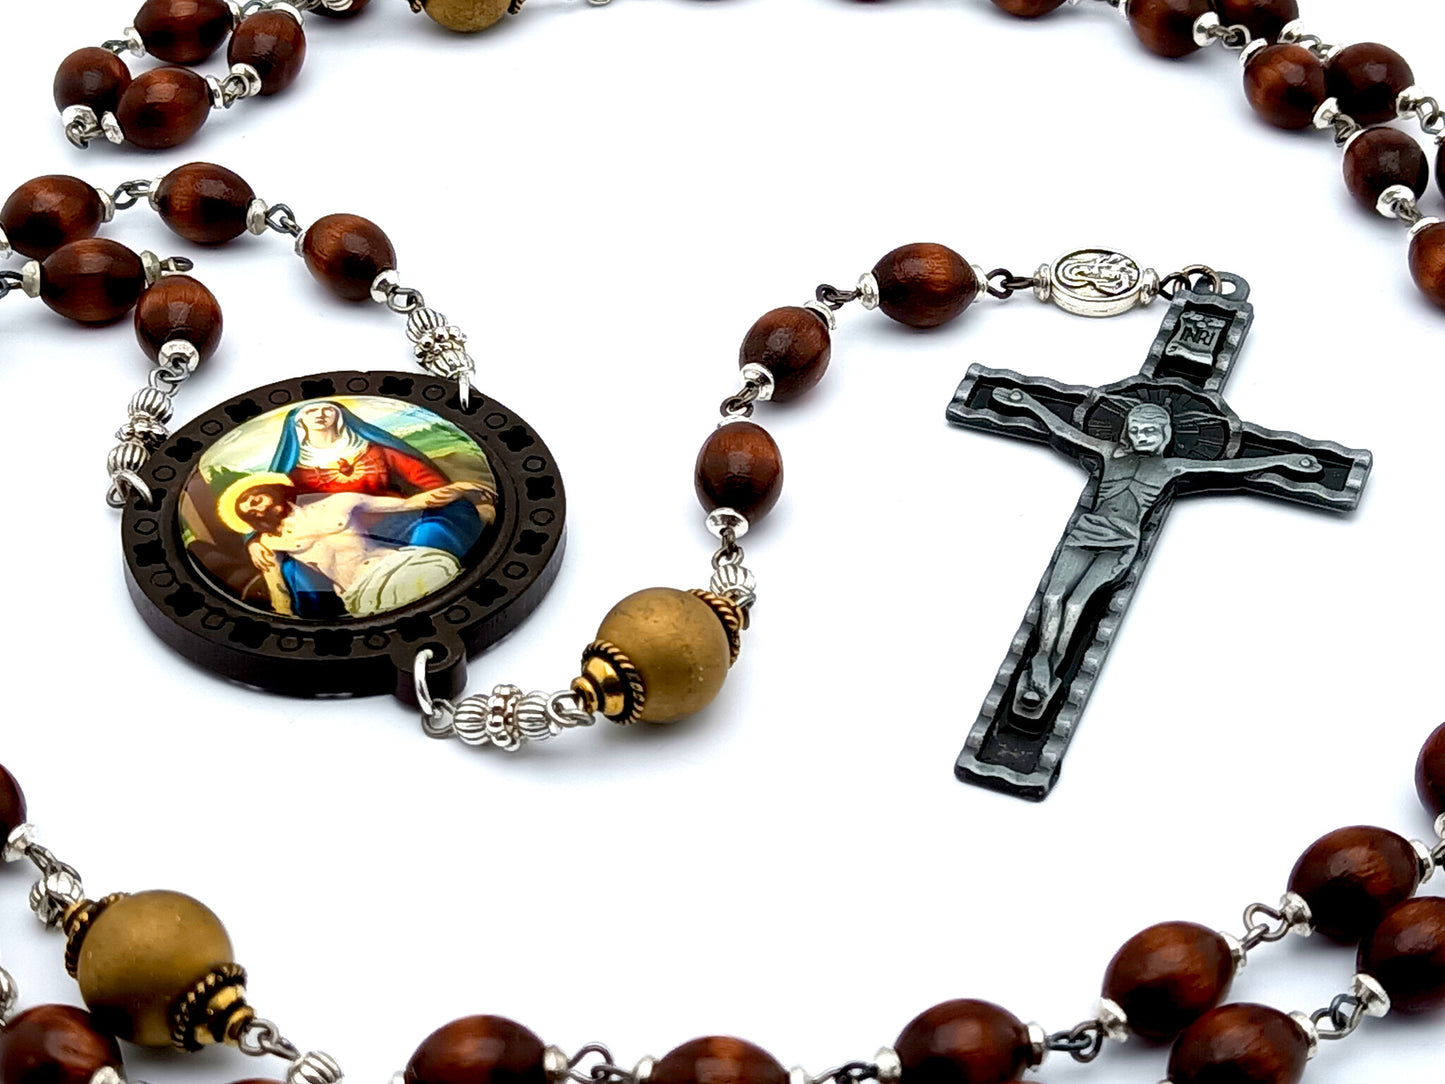 Our Lady of Sorrows unique rosary beads dolor rosary with wooden and gold glass beads, pewter crucifix and picture centre medal.